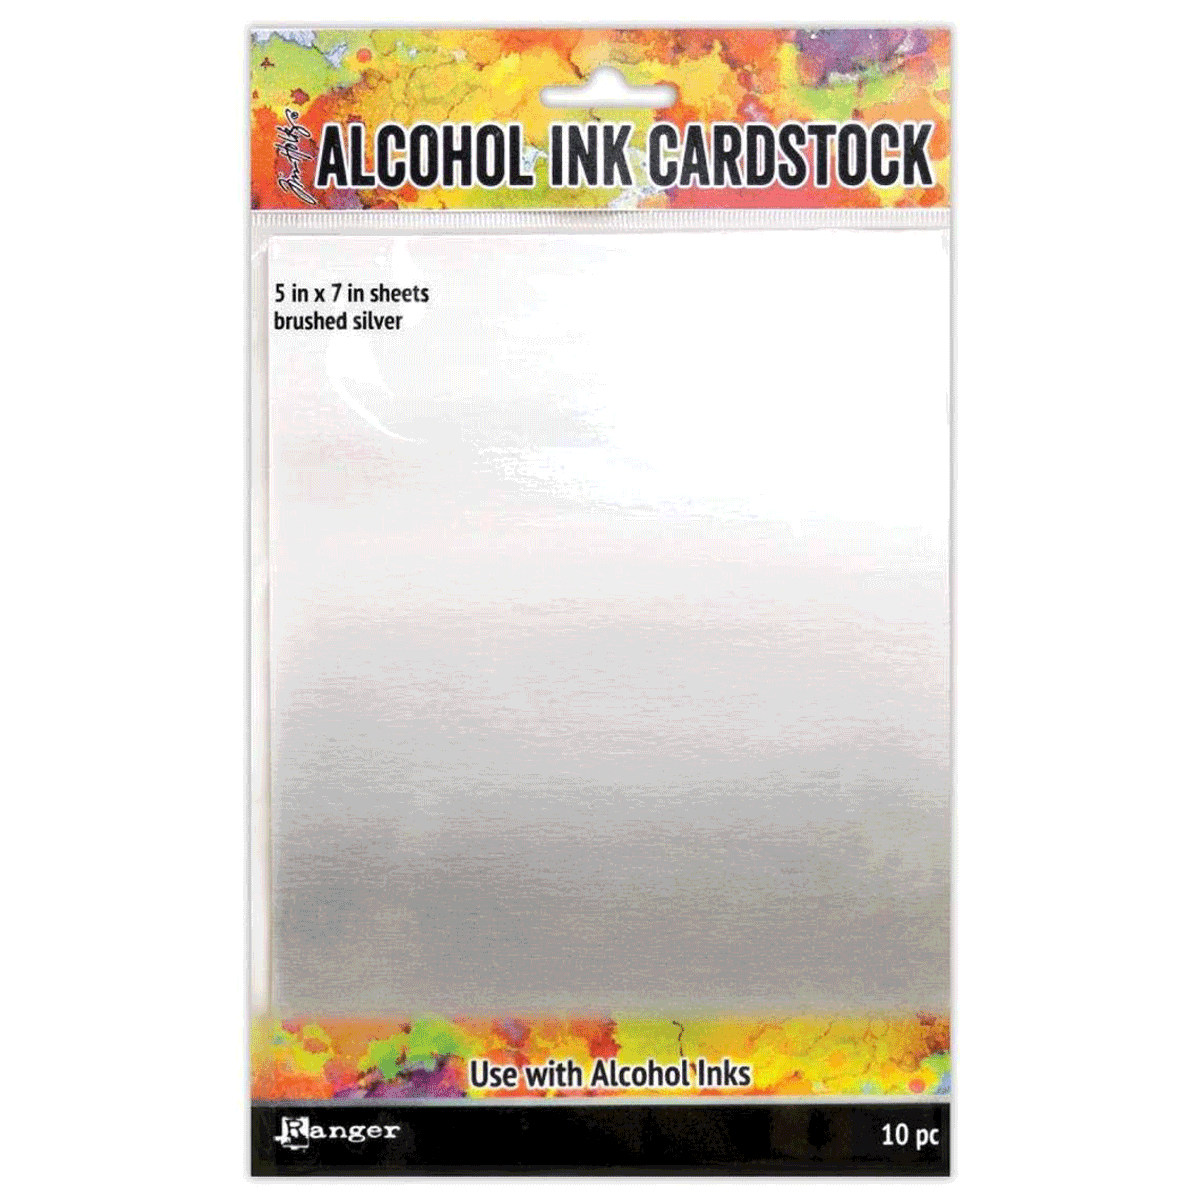 Tim Holtz Alcohol Ink Cardstock Brushed Silver (5x7) 10 pc